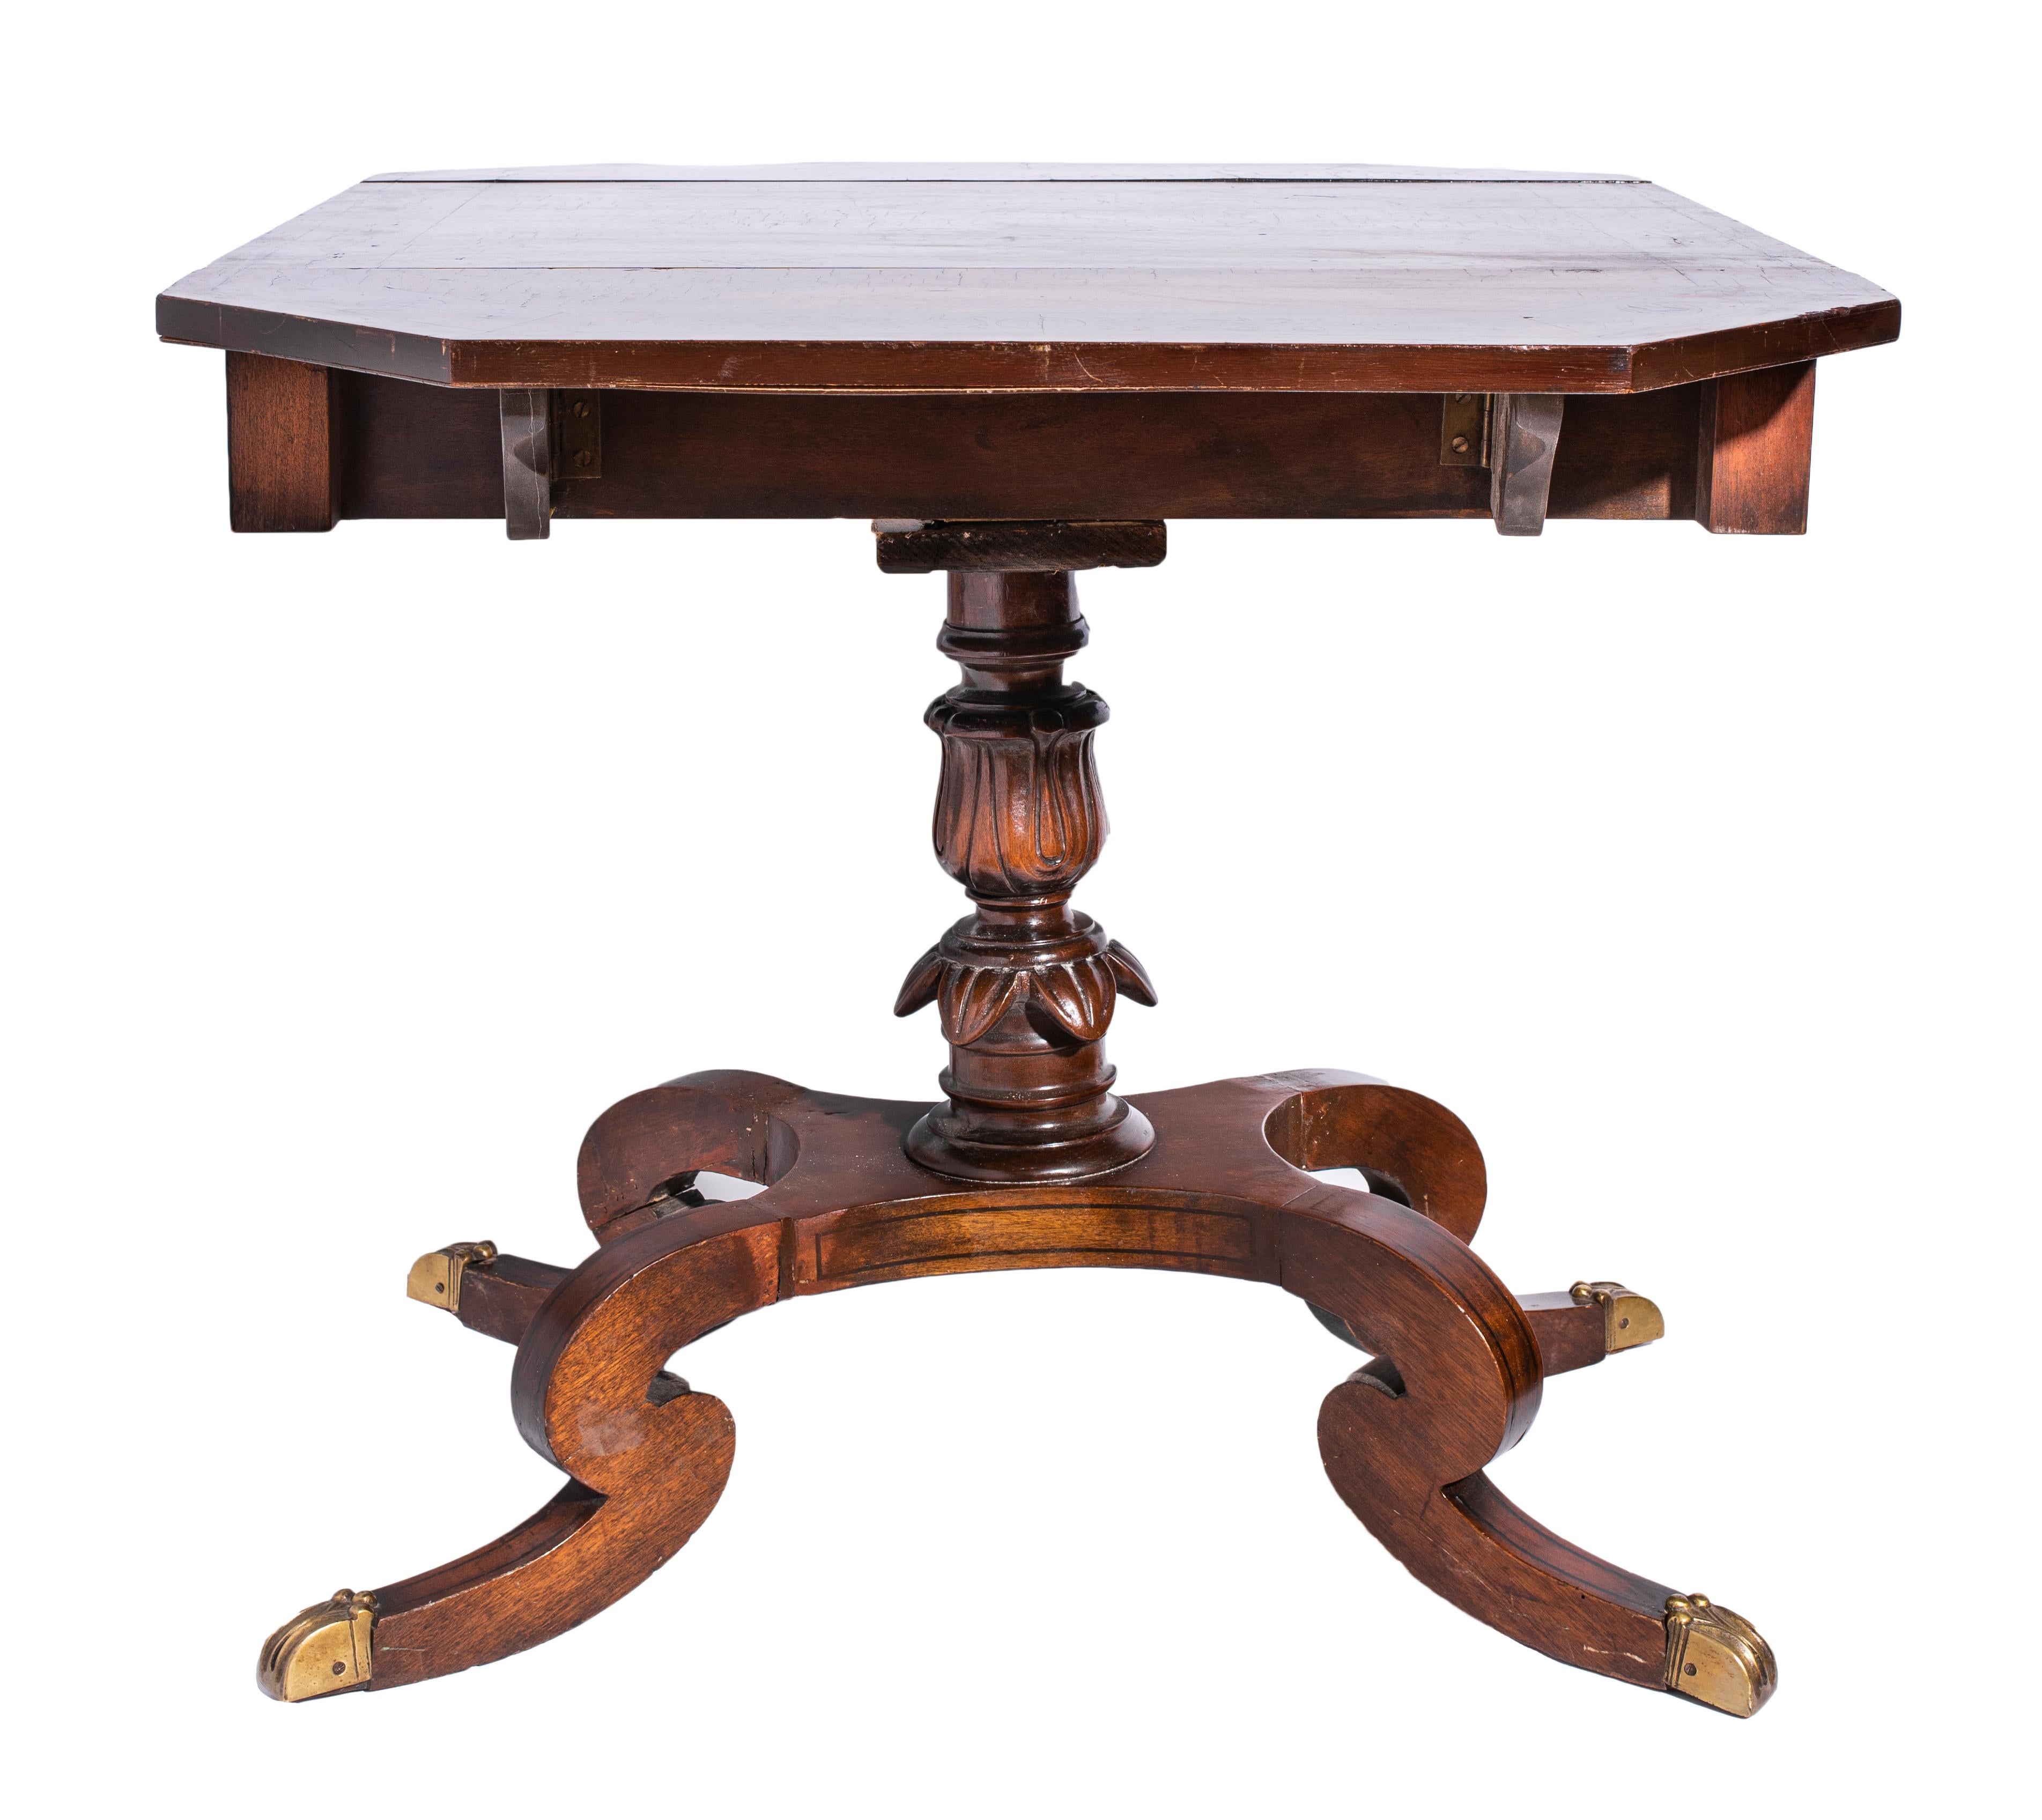 Regency style drop leaf sofa table with floral and scrolling details. 28.5” H x 37.5” W x 29.75” D.